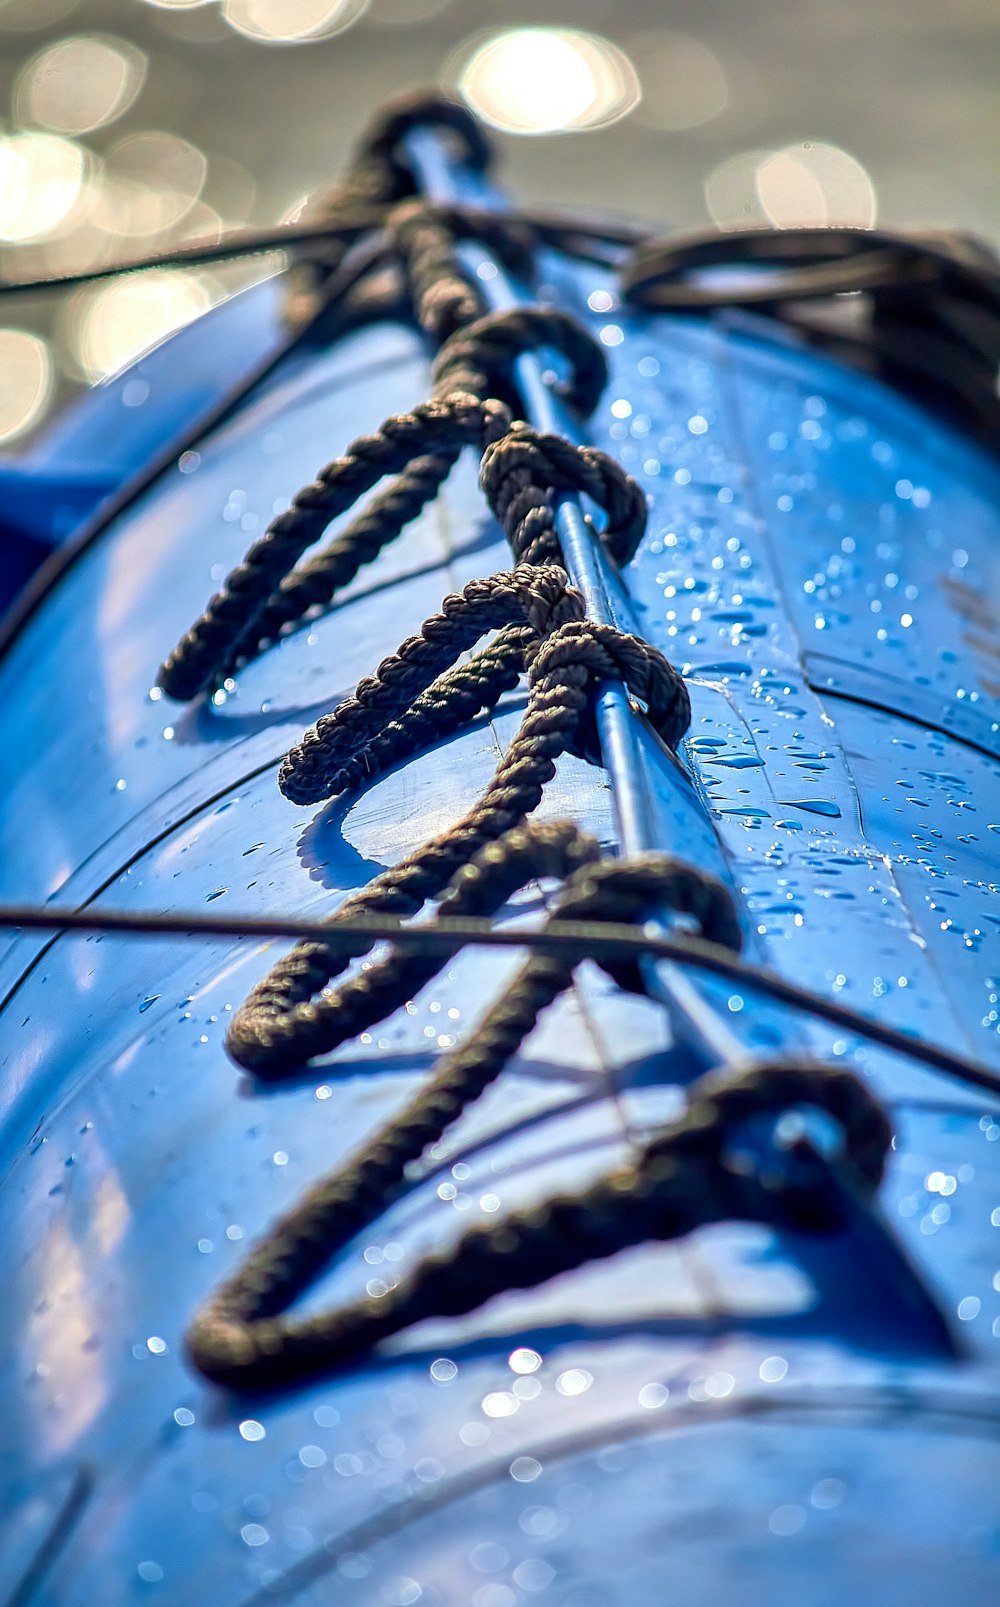 a close up of a blue boat with ropes